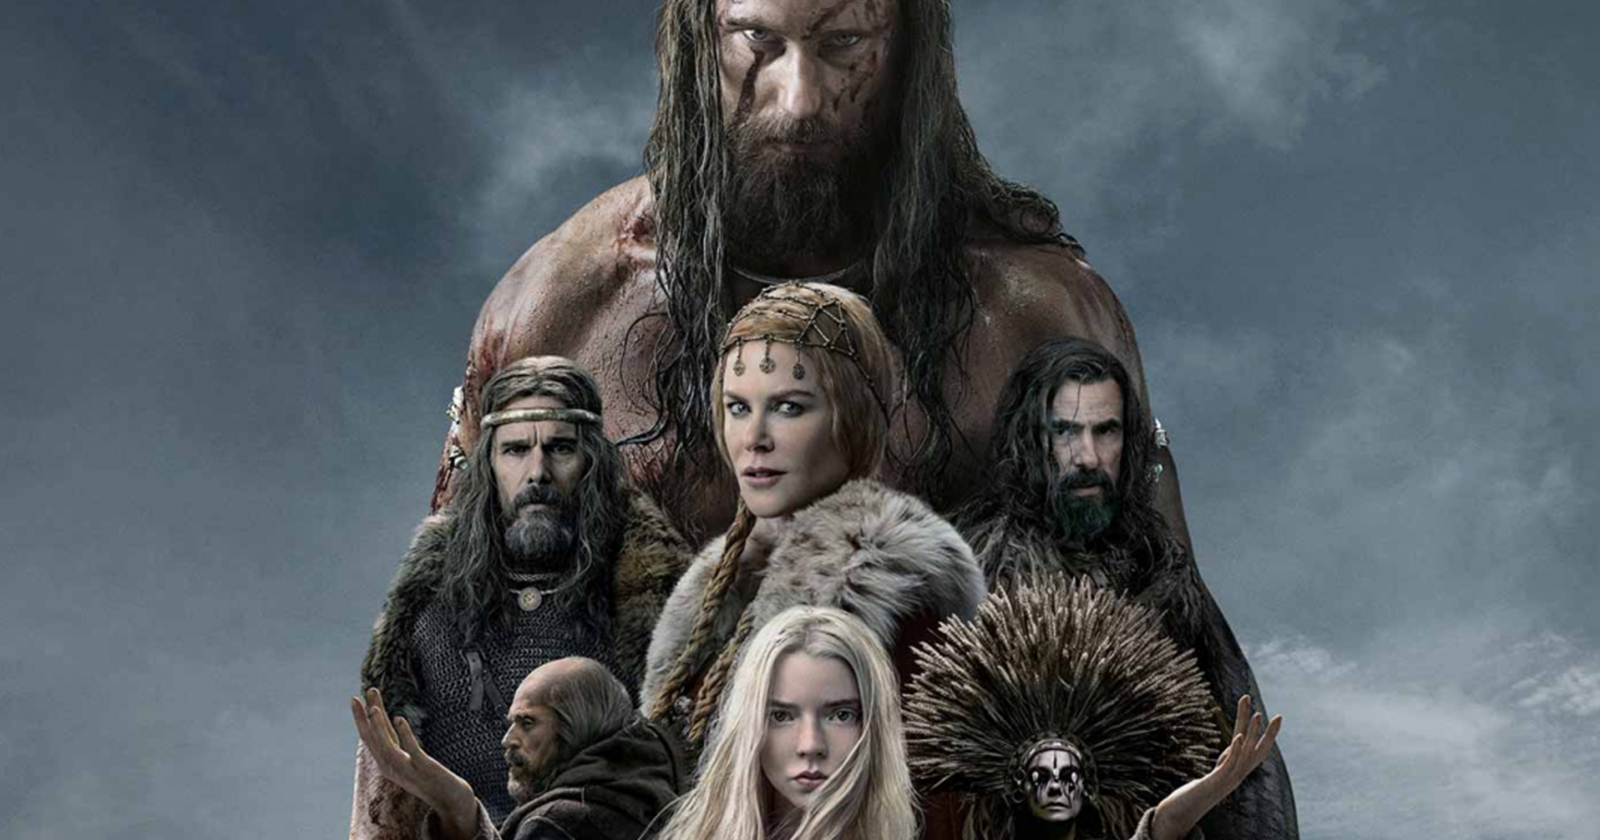 Behold the new poster for The Northman